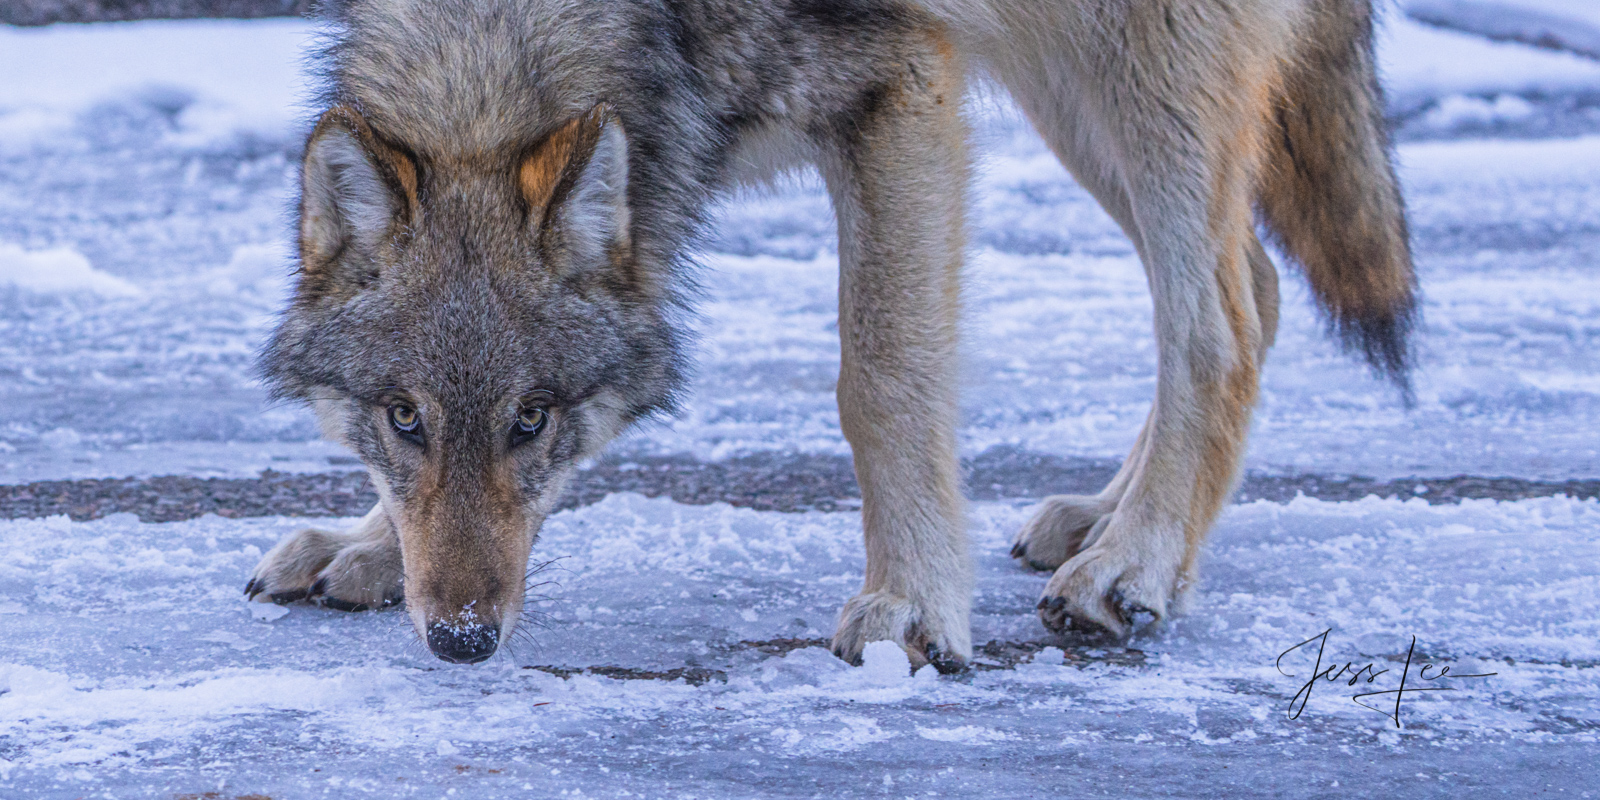 Curious wolf in Grand Teton Park. A limited edition wild wolf photography Print by Jess Lee